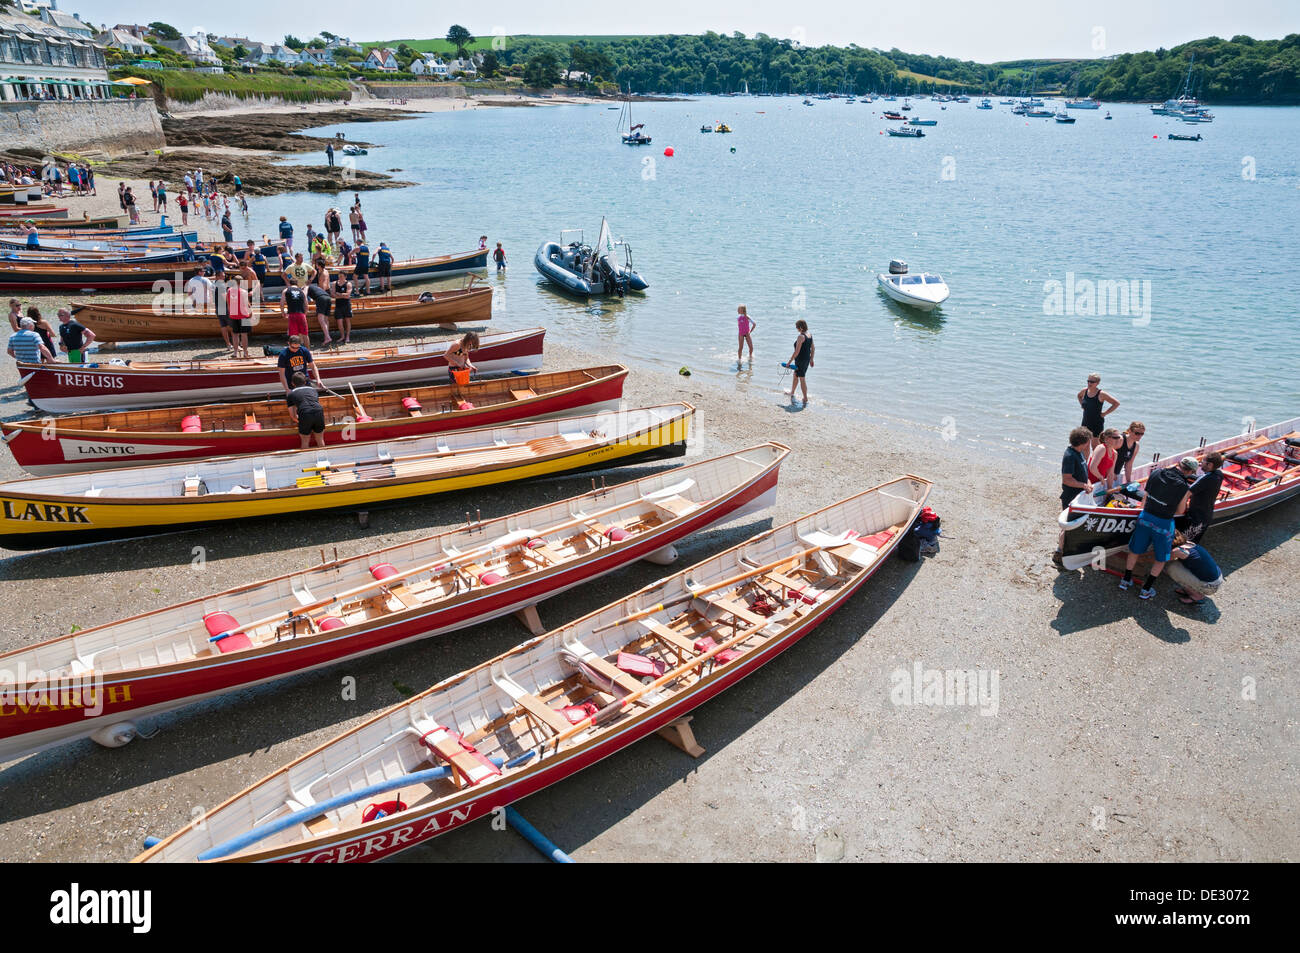 Great Britain, England, Cornwall, St. Mawes, participants preparing for Cornish pilot gig six oared rowing boat races Stock Photo